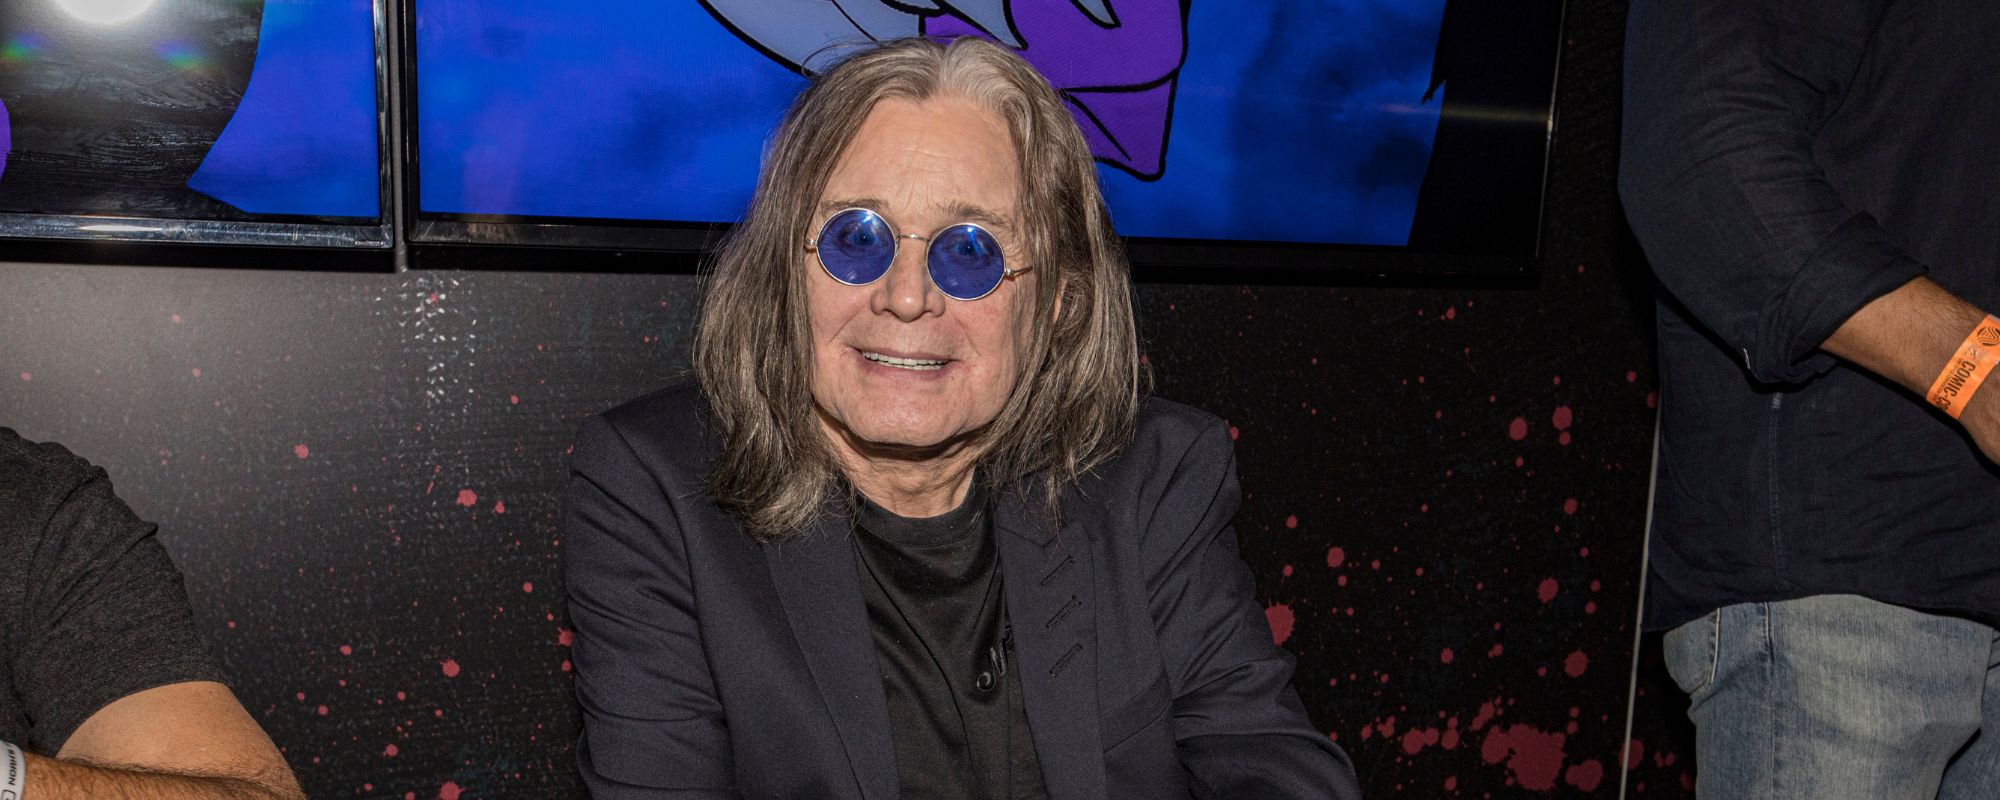 Ozzy Osbourne says he “just can't walk much now”